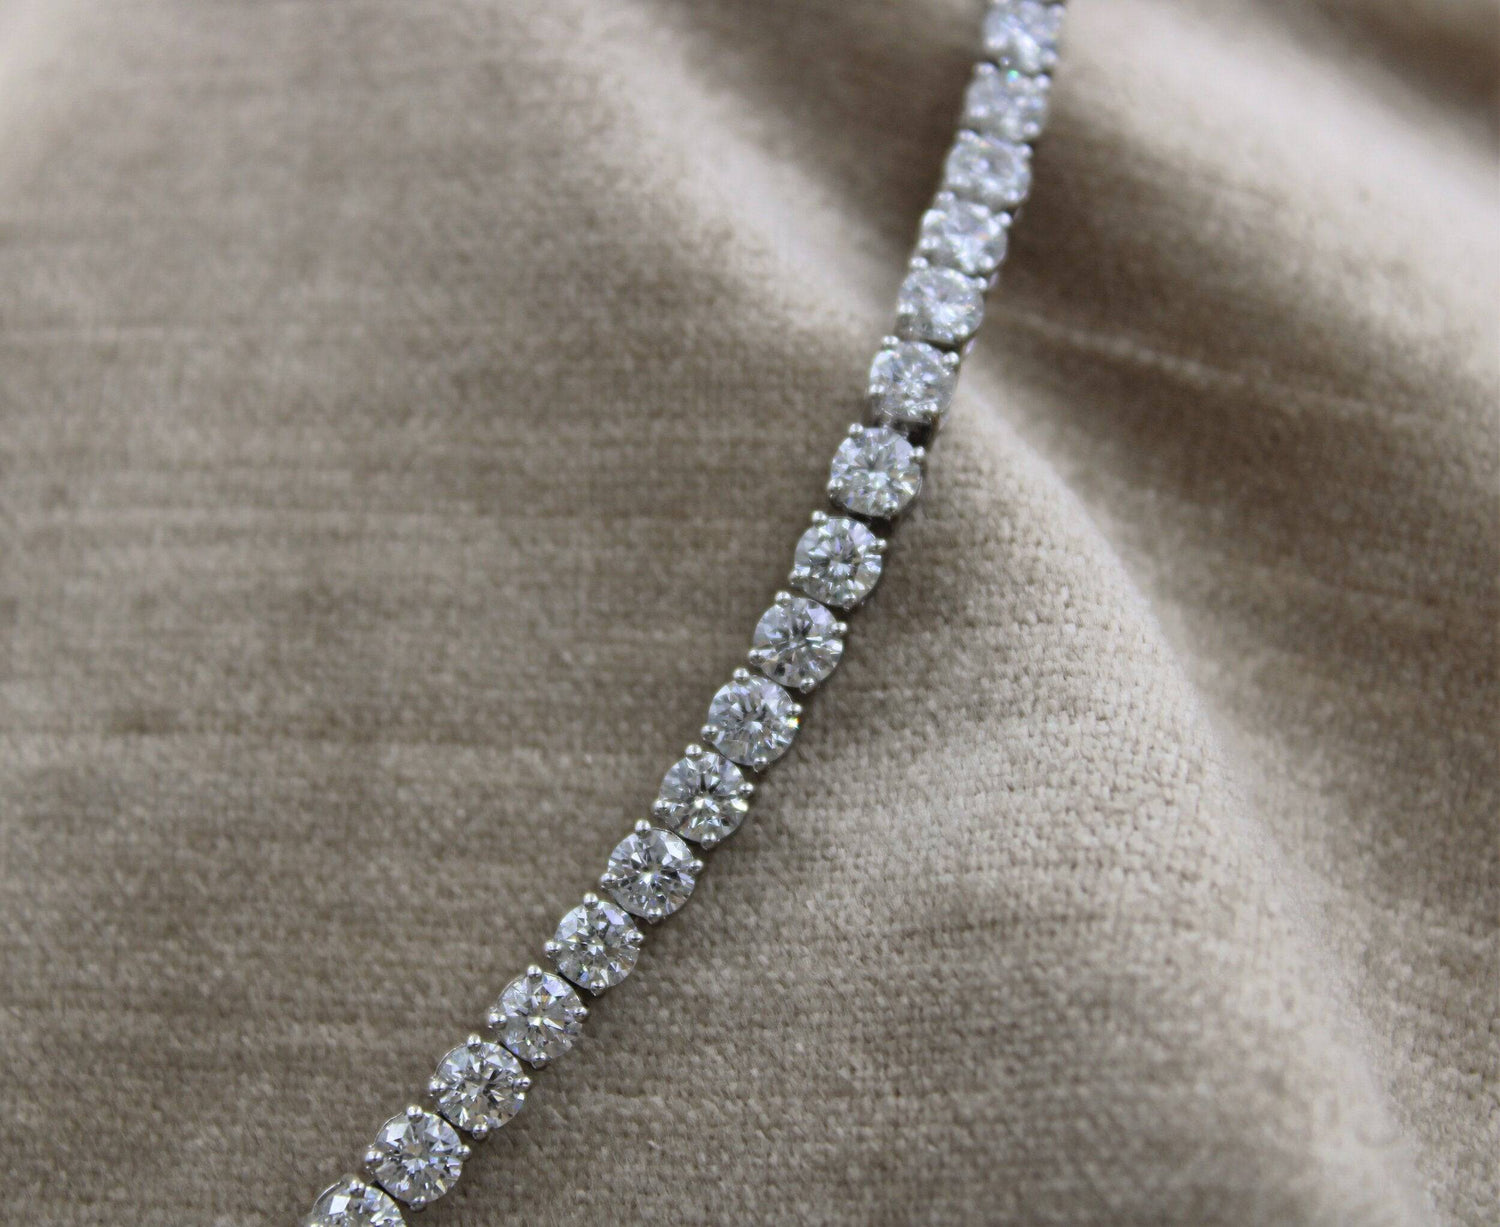 A very fine 10.04ct Diamond Line Bracelet mounted in 18ct White Gold, Pre-owened - Robin Haydock Antiques